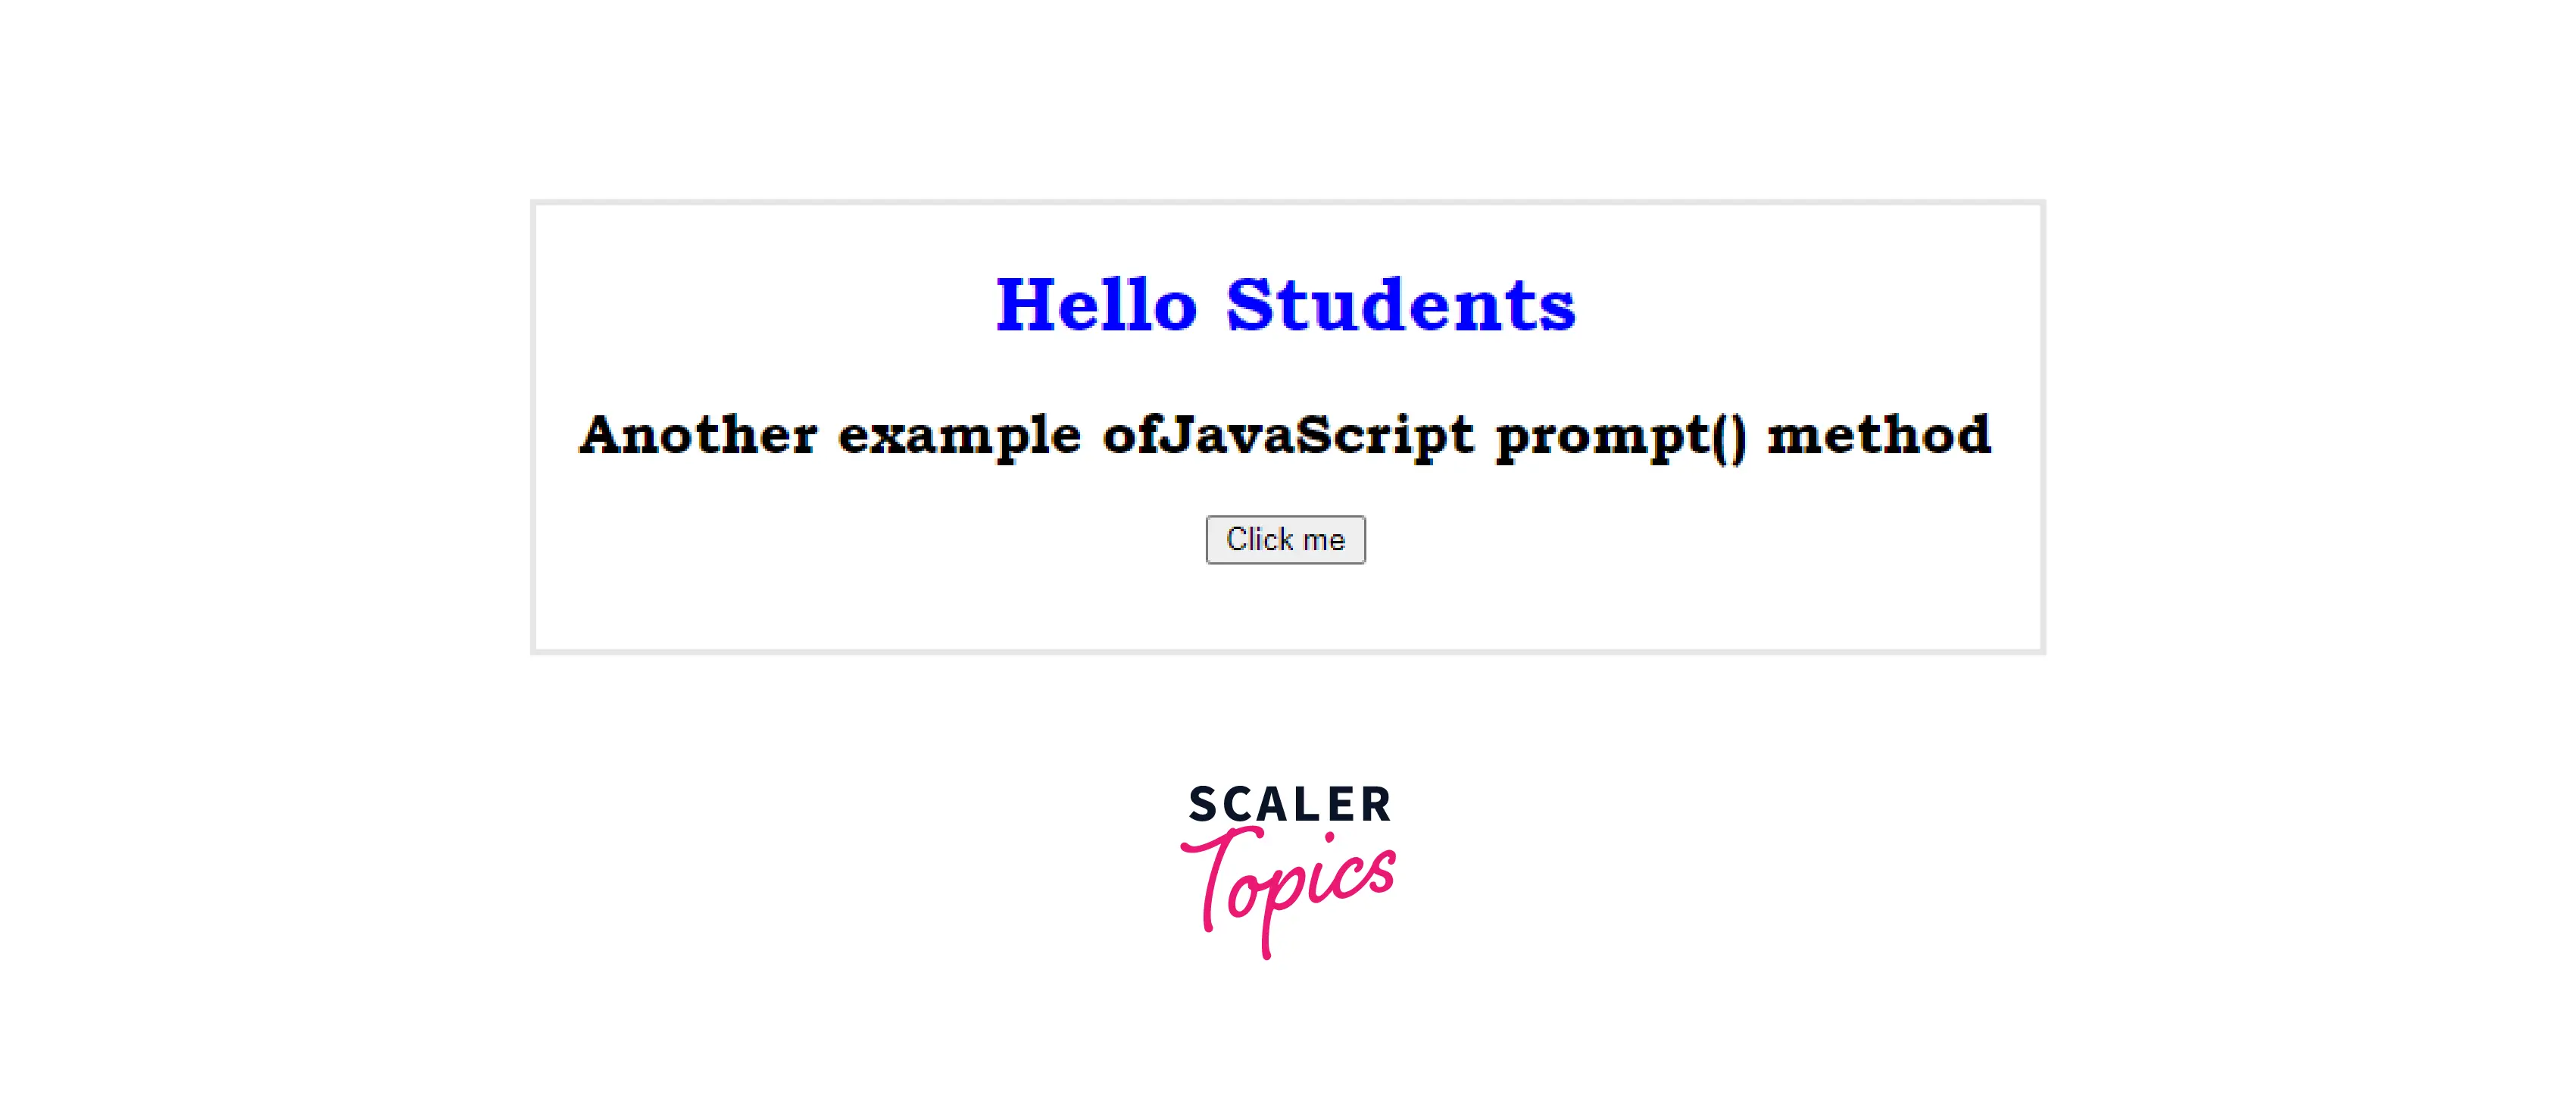 example-of-window-prompt-before-clicking